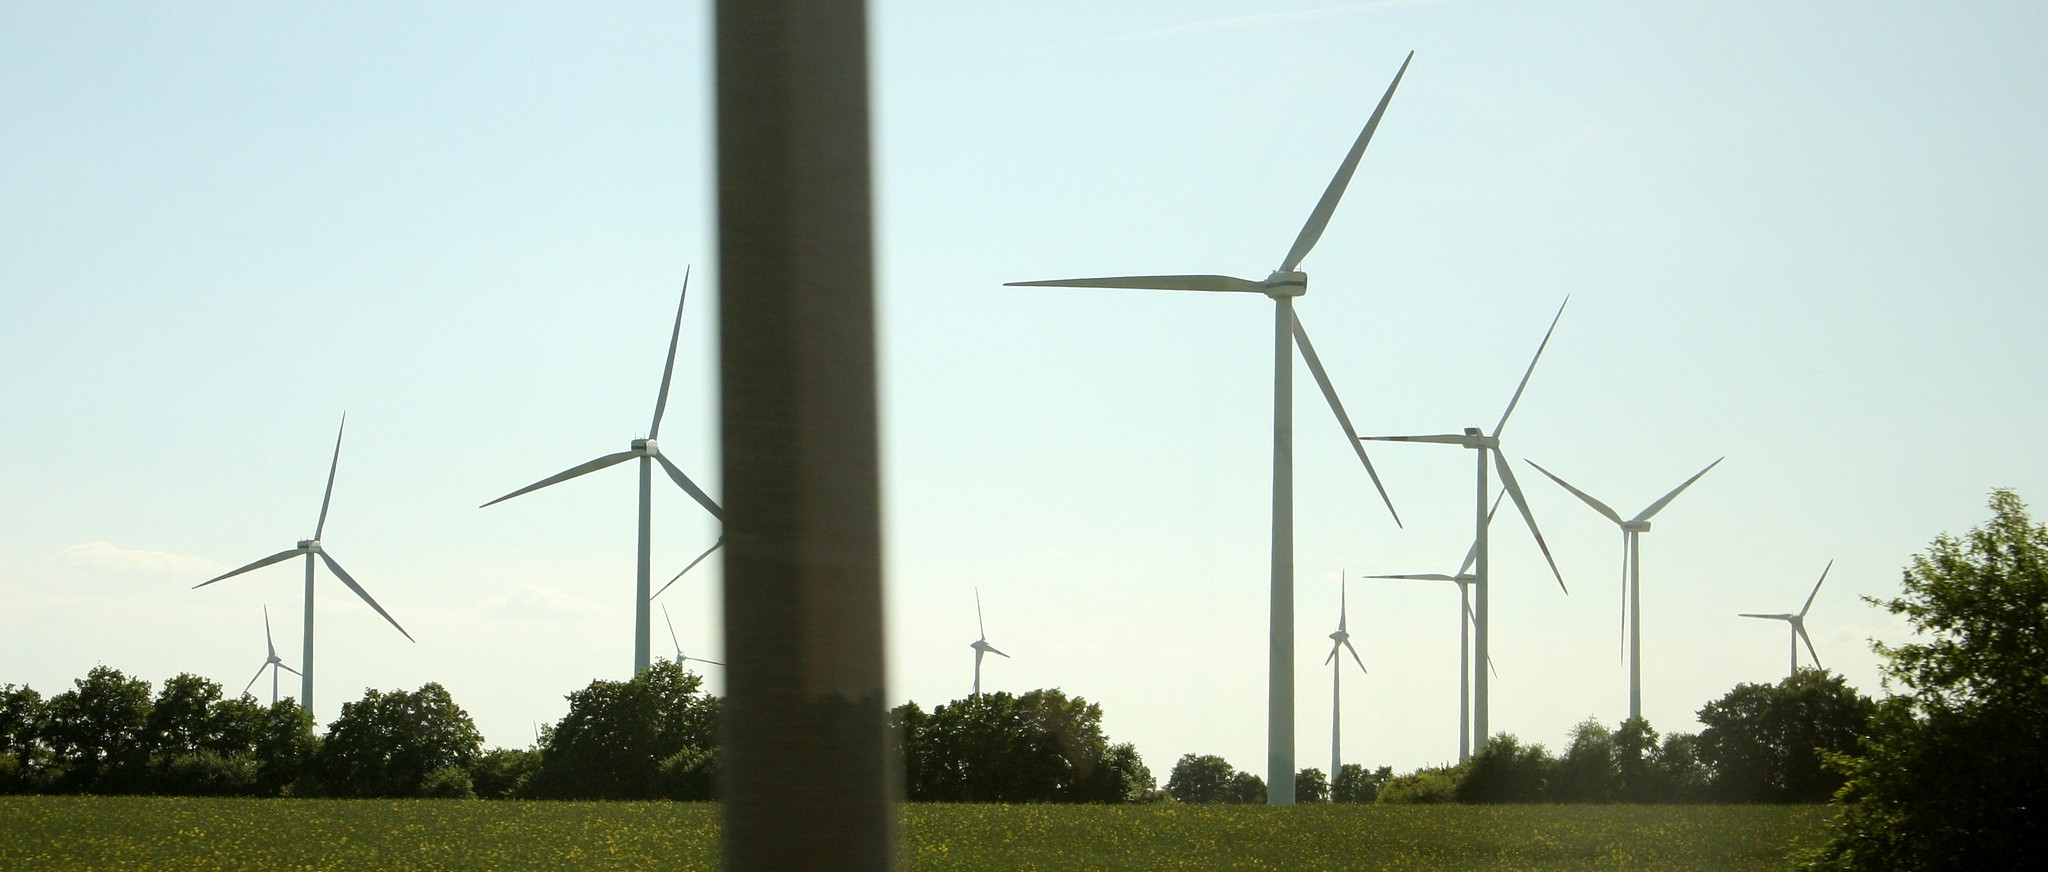 Wildlife Conservation Research - Wind farm in Germany